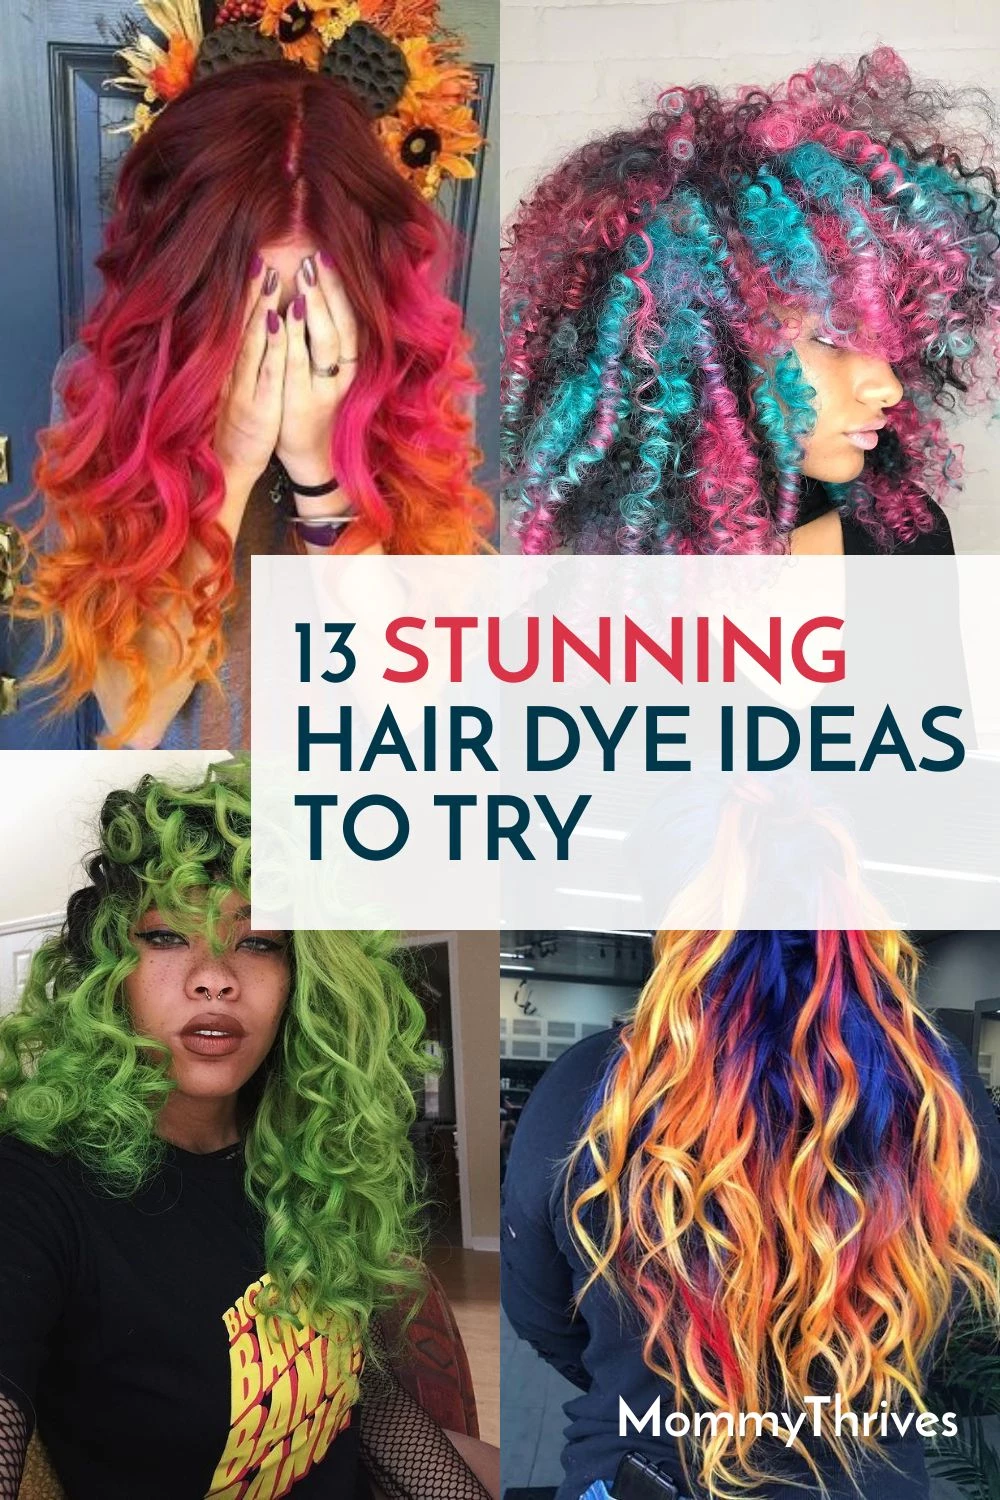 Hair Inspiration For Fun Colors - Funky Hair Colors To Try - Multi Color Hair Ideas